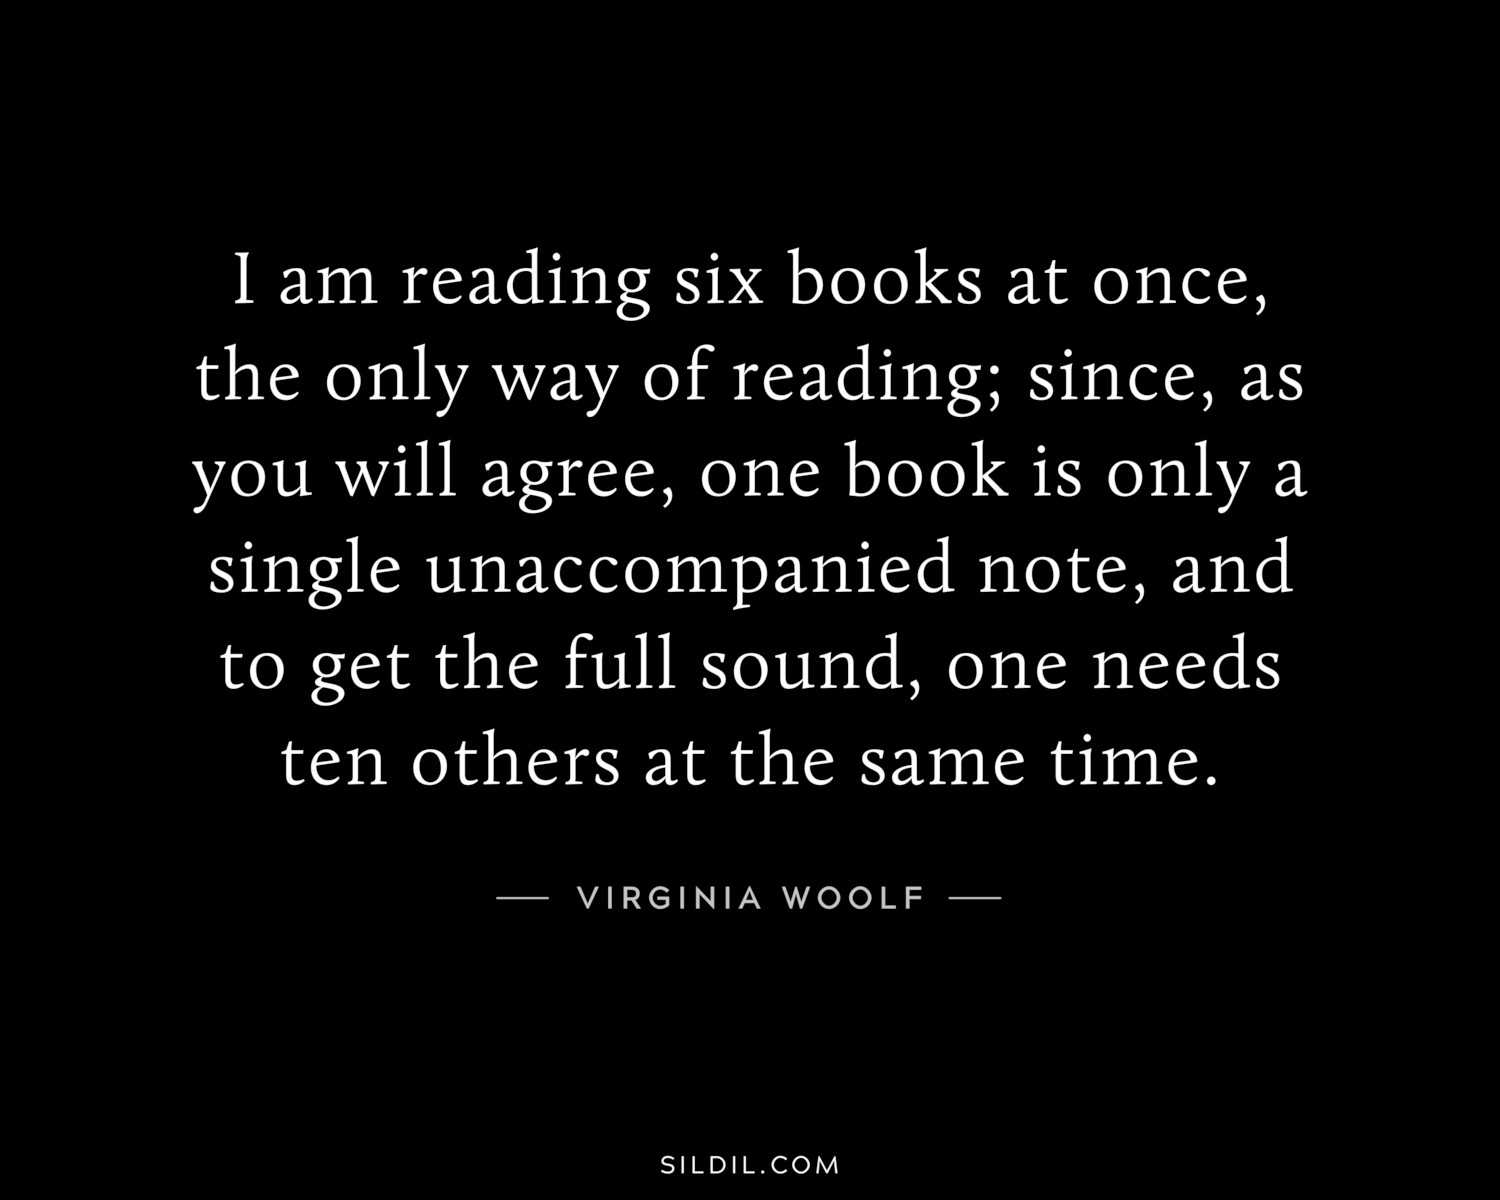 I am reading six books at once, the only way of reading; since, as you will agree, one book is only a single unaccompanied note, and to get the full sound, one needs ten others at the same time.